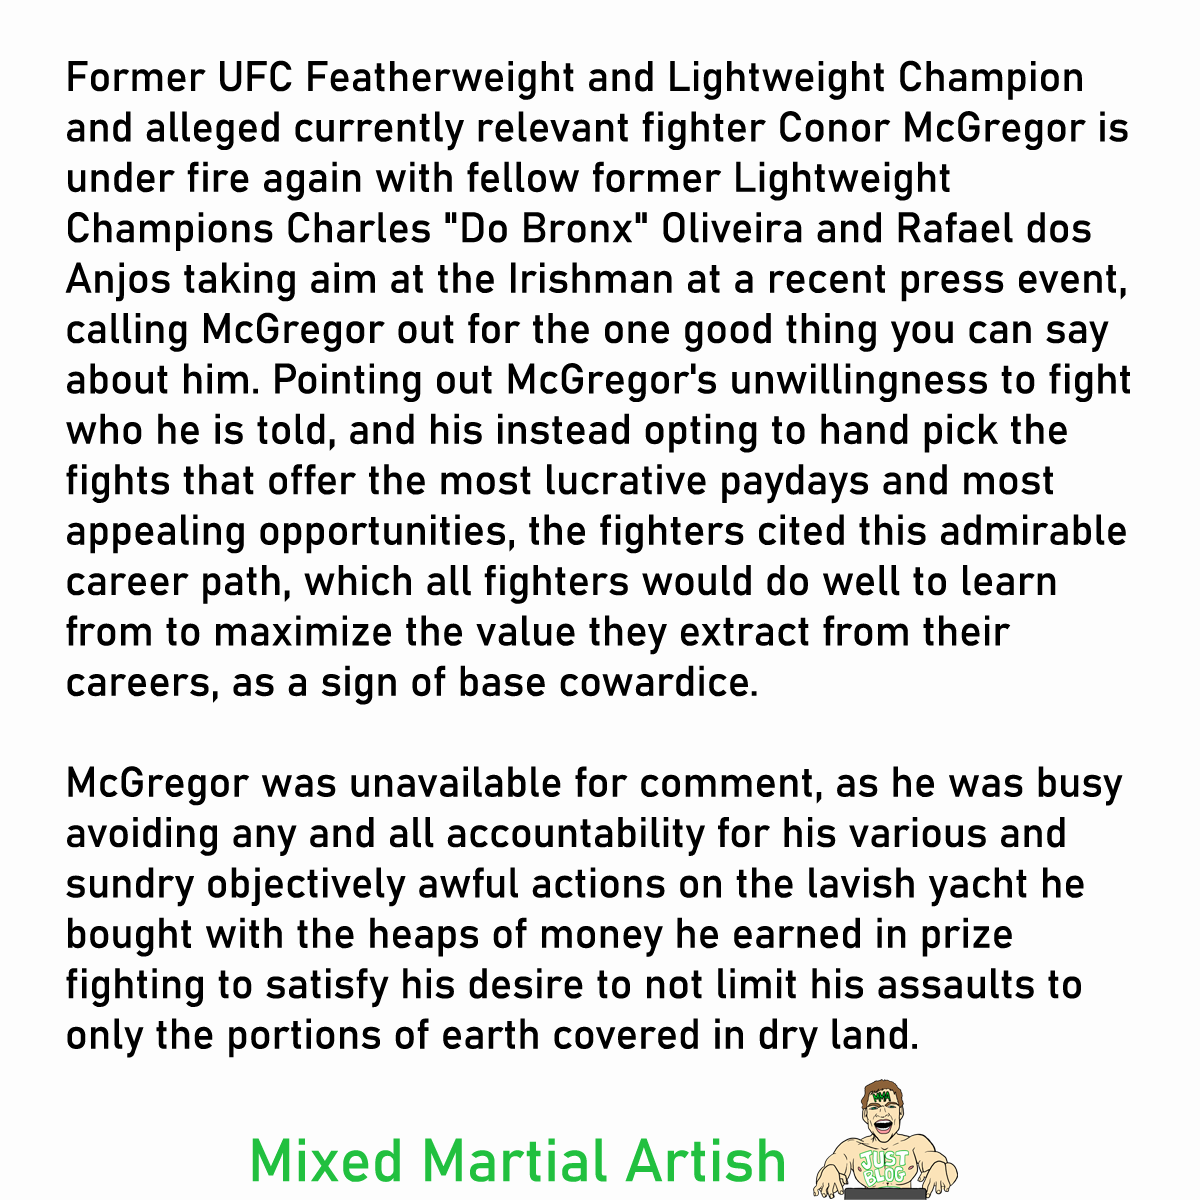 Rumor is he only fights to make a lot of money as if it's his job or something. #ufc #conormcgregor #charlesoliveira #rafaeldosanjos